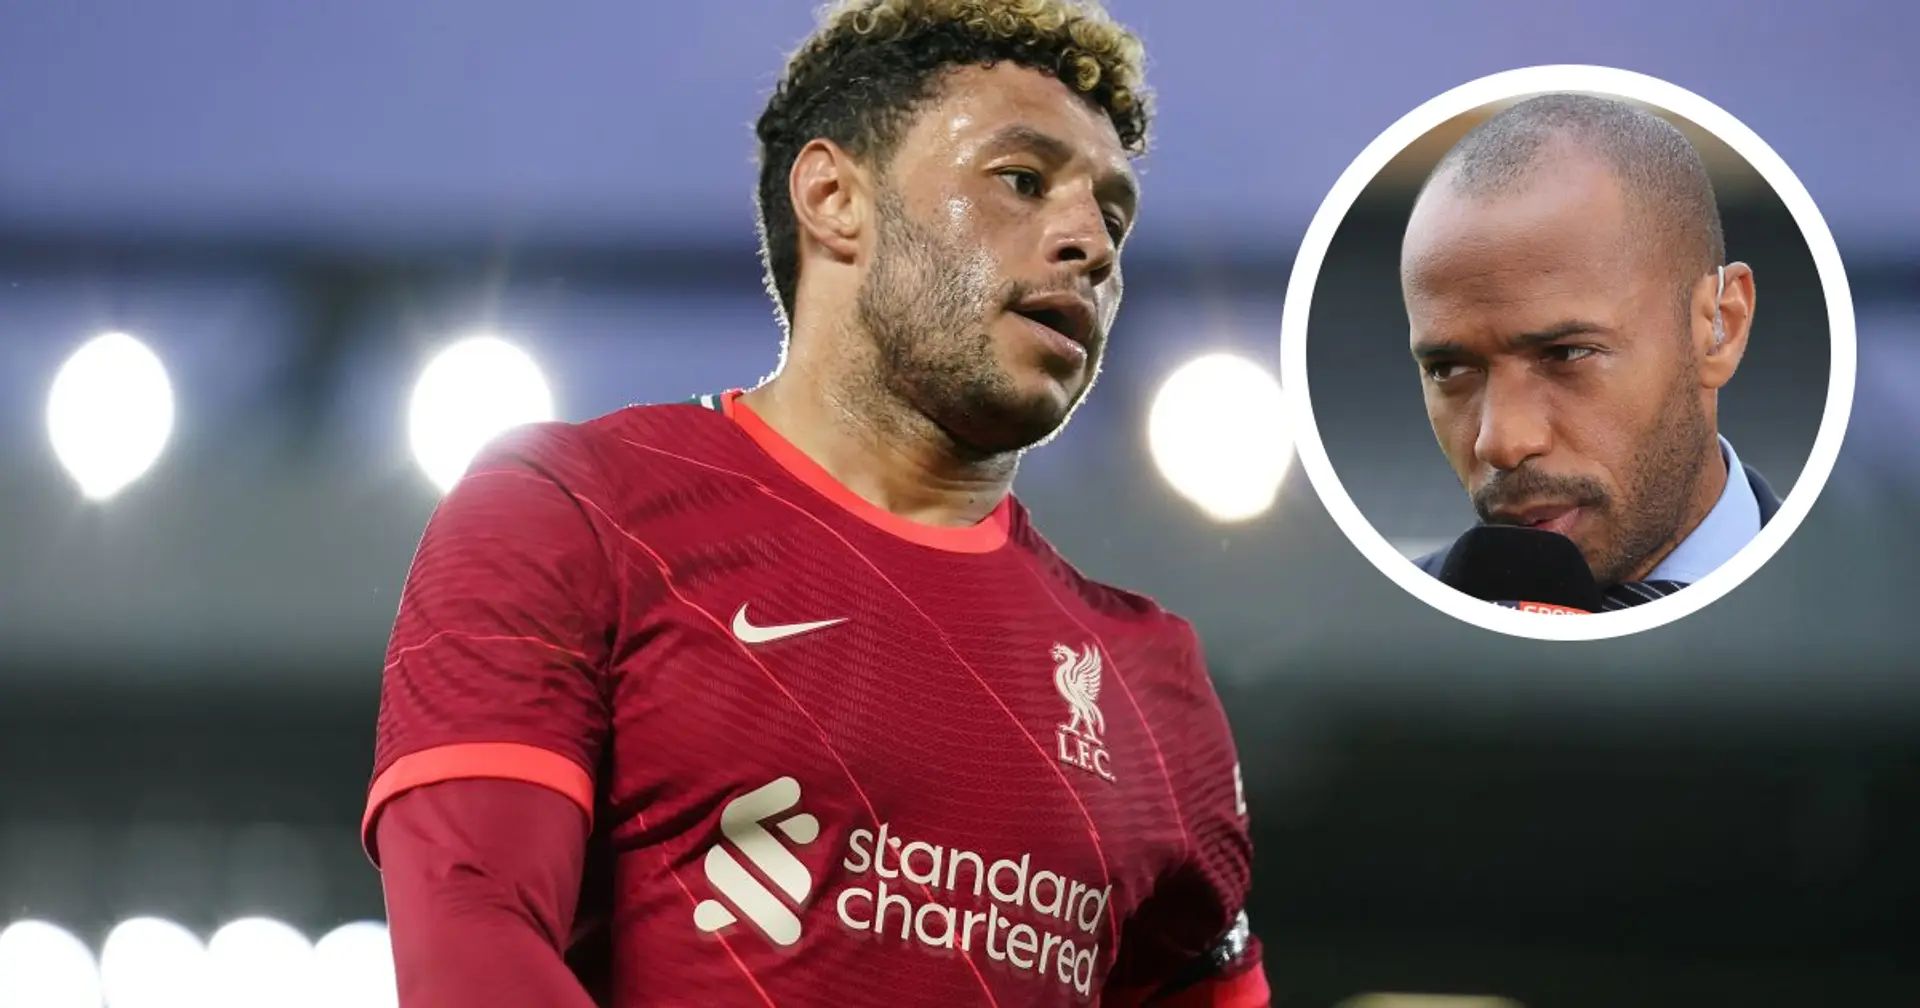 'I still don't know what he's good at': Thierry Henry questions Ox's ability